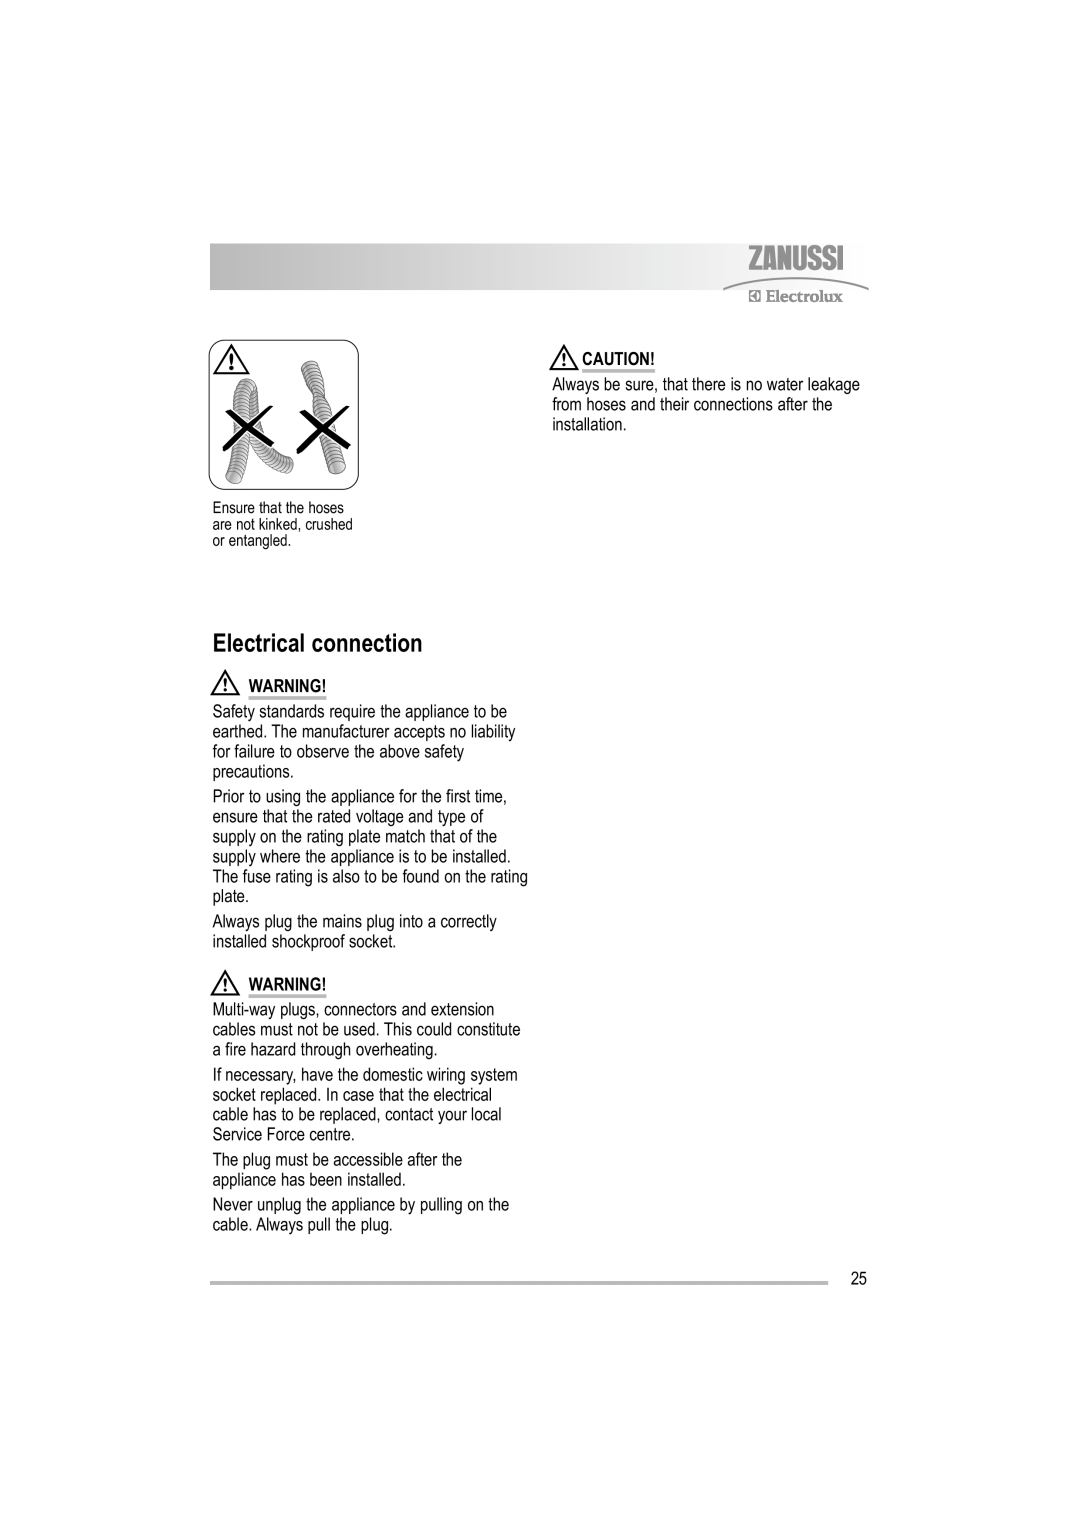 Electrolux ZDF 501 user manual Electrical connection 